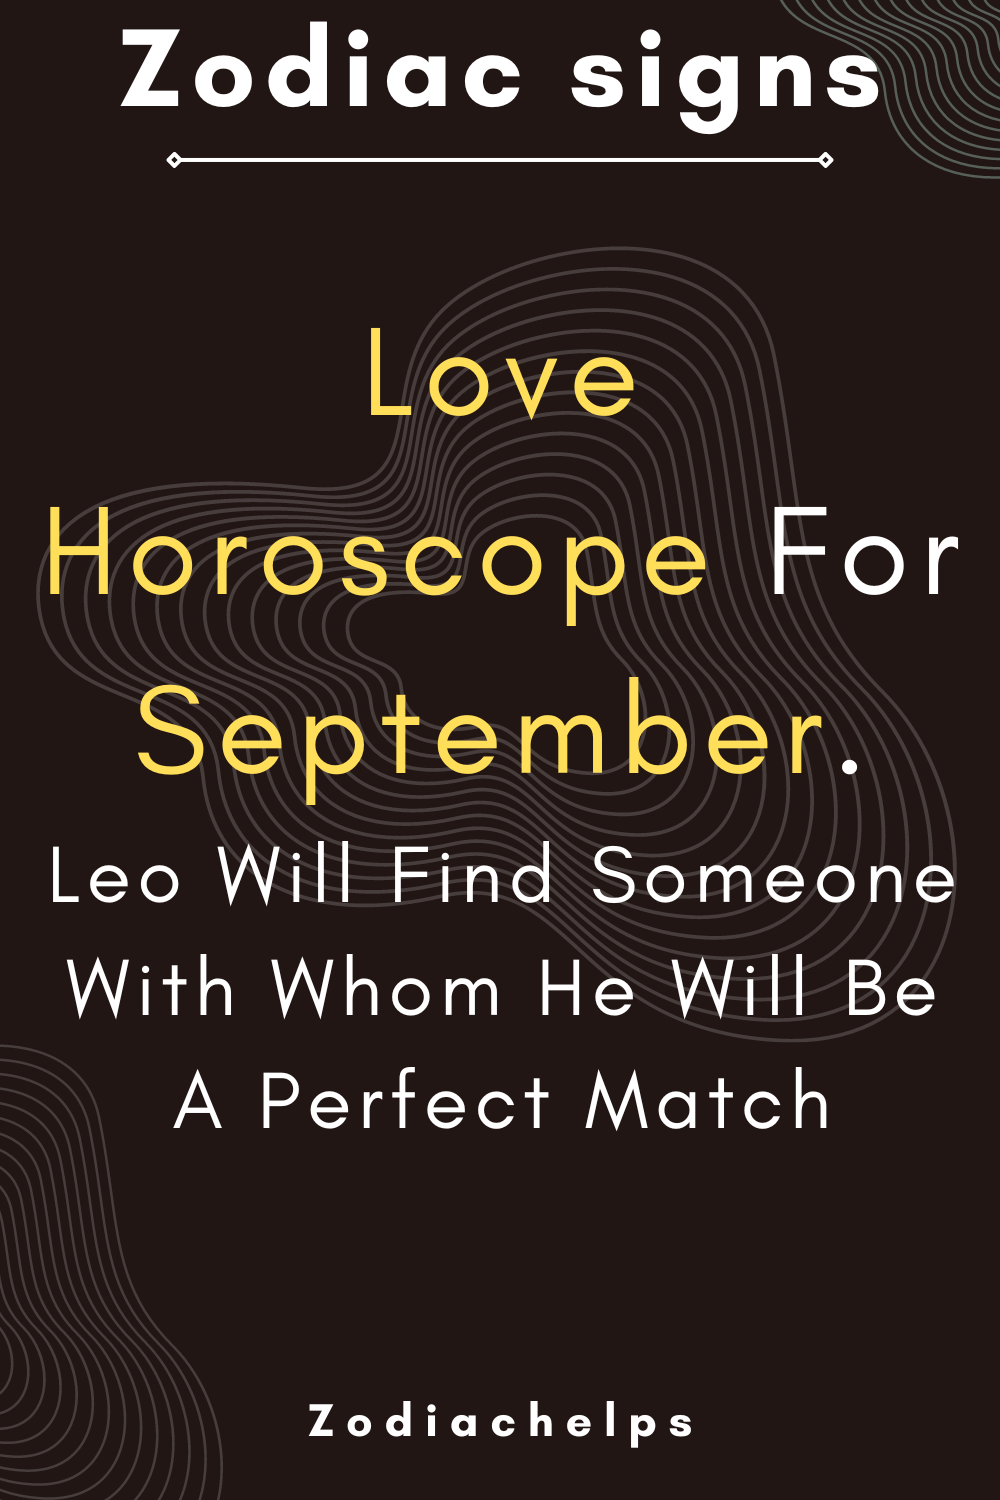 Love Horoscope For September. Leo Will Find Someone With Whom He Will Be A Perfect Match